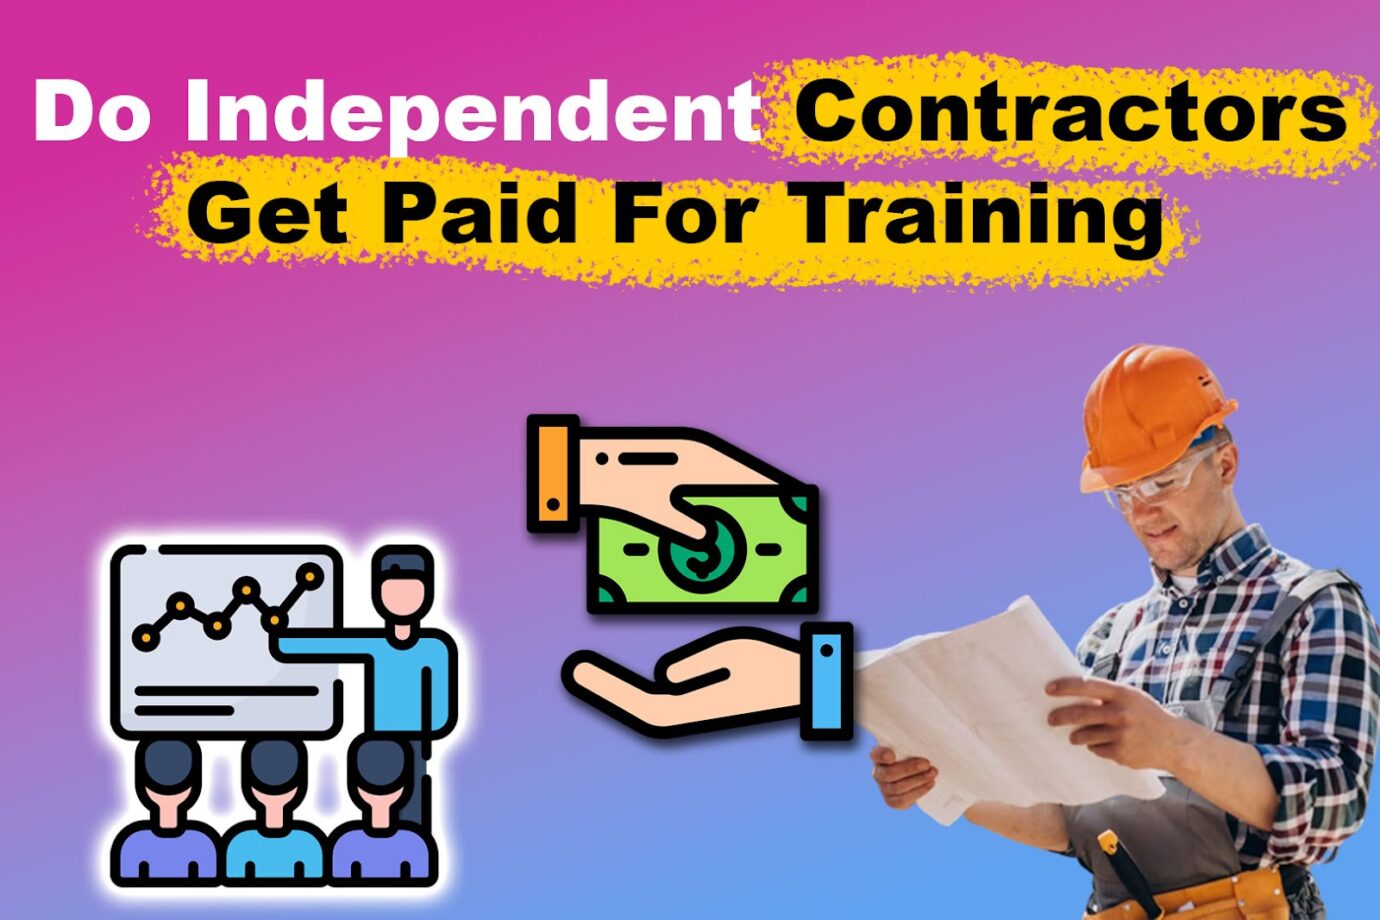 Do Independent Contractors Get Paid For Training